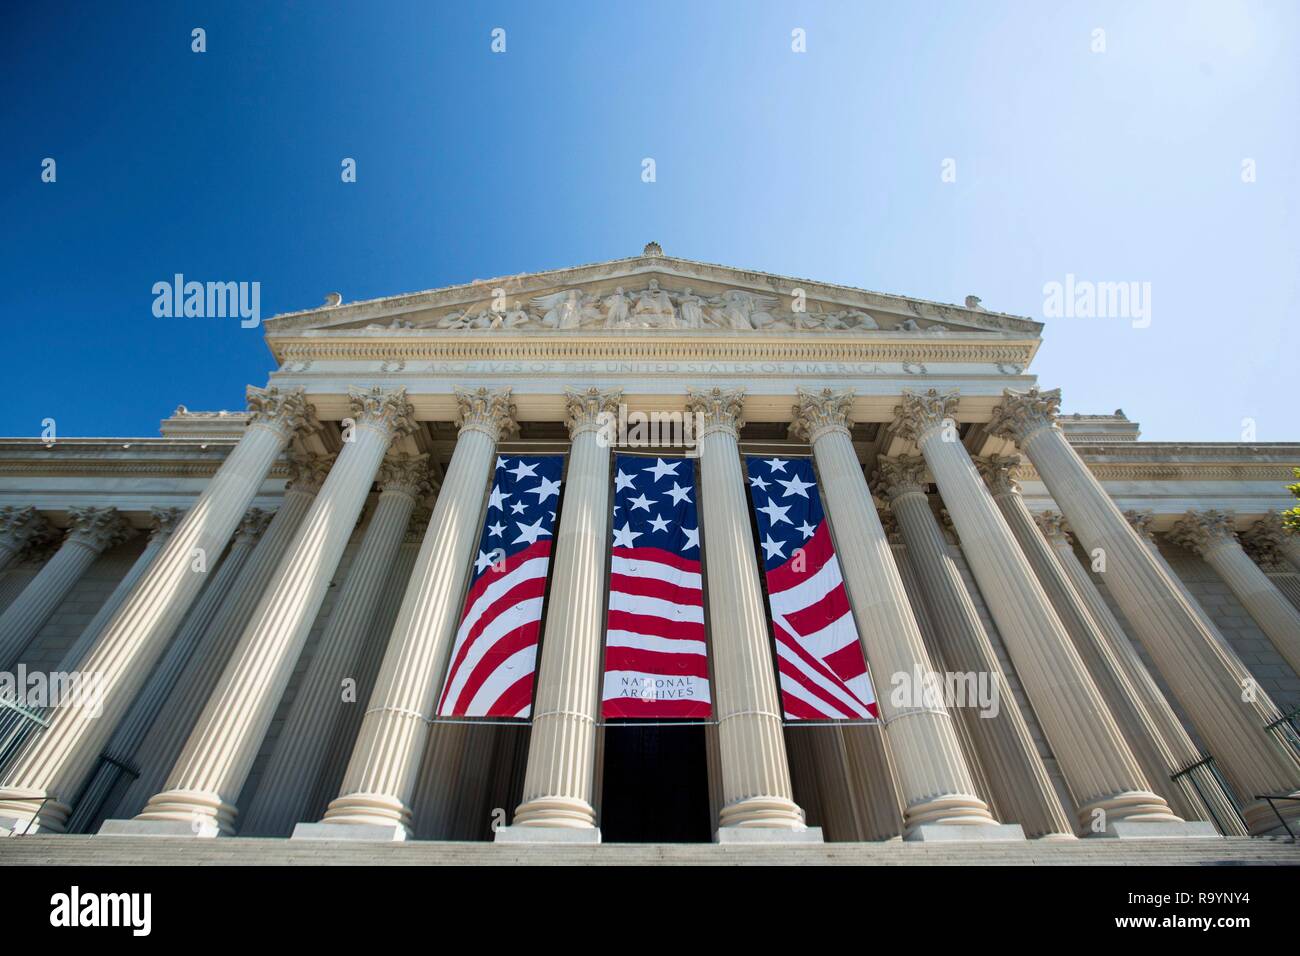 American flag banners decorated the columns on the Constitution Avenue side of the National Archives building in preparation for Fourth of July ceremonies June 28, 2017 in Washington, D.C. The National Archives building holds the original copies of the three main formative documents of the United States and its government: the Declaration of Independence, the Constitution, and the Bill of Rights. Stock Photo